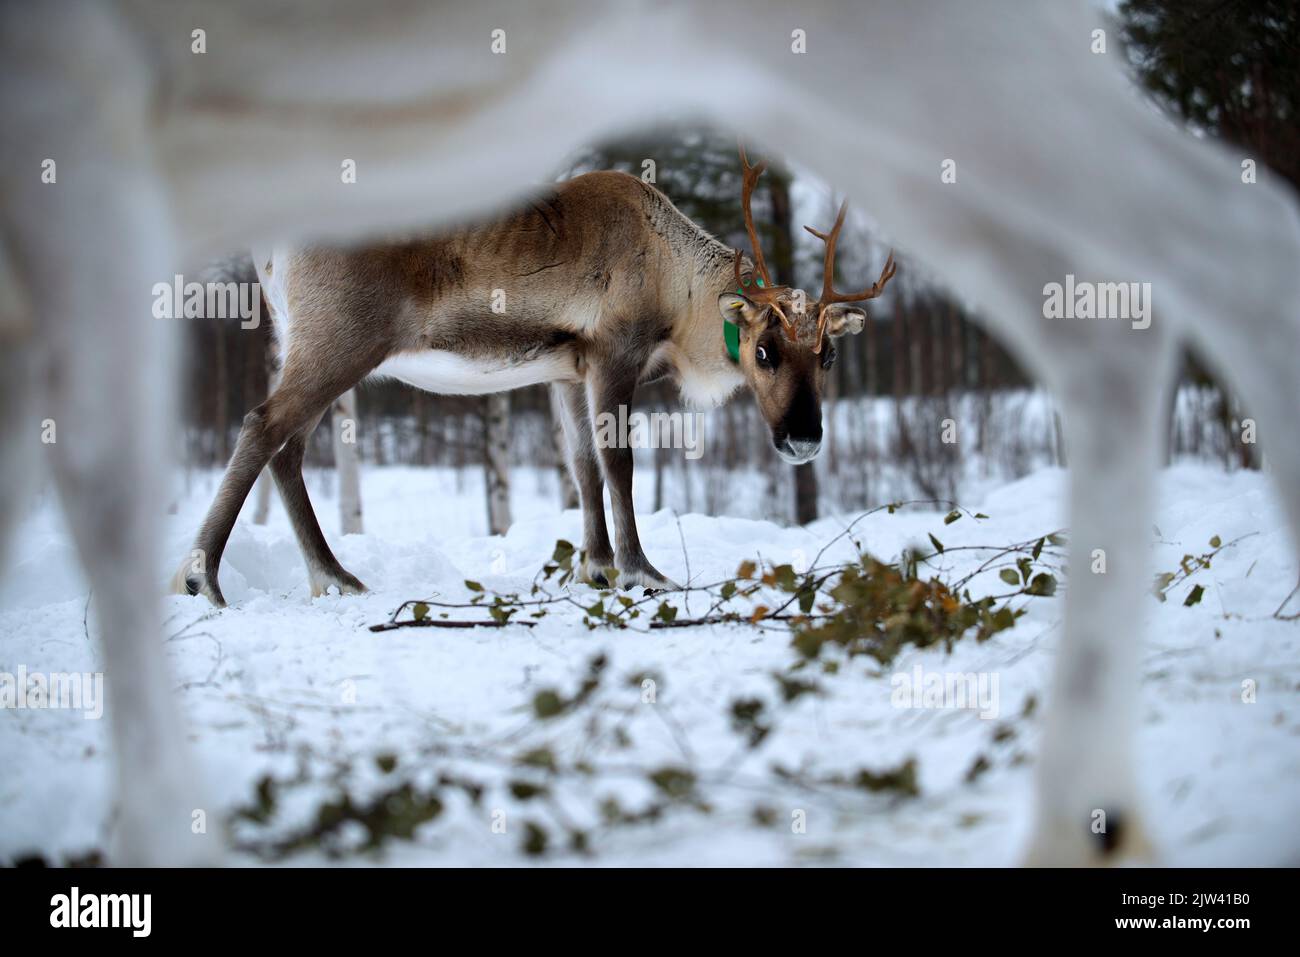 Reindeer farm in Salla, Lapland Finland.   Warmer temperatures mean the Sami are unable to find food for their reindeer.  In the last month of January Stock Photo